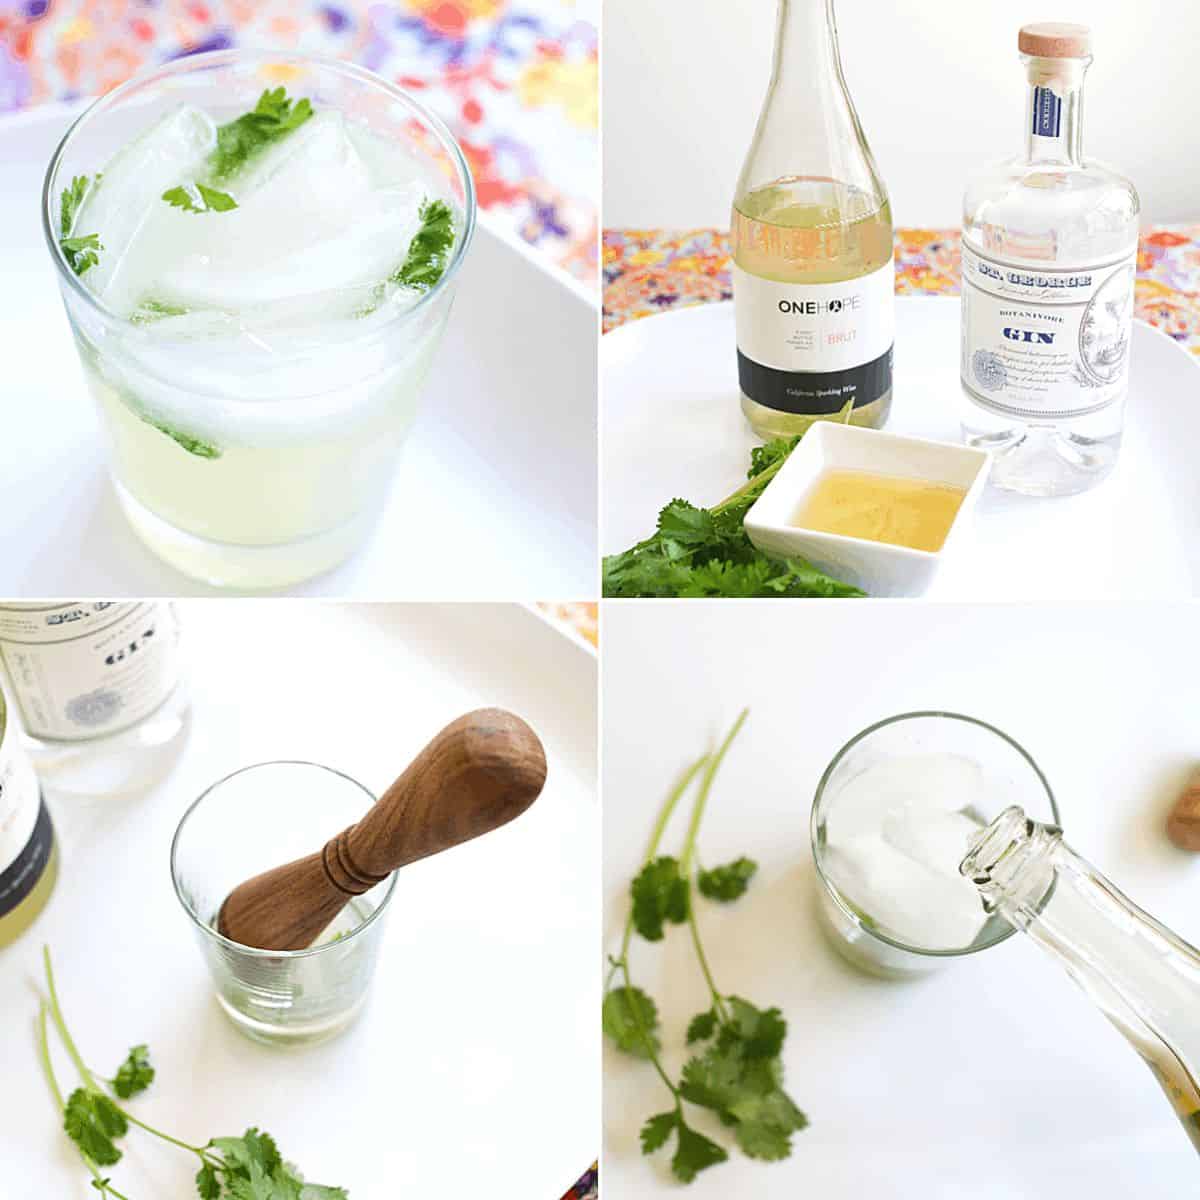 https://www.cupcakesandcutlery.com/wp-content/uploads/2014/08/gin-cocktail-recipe-with-sparkling-wine.jpg